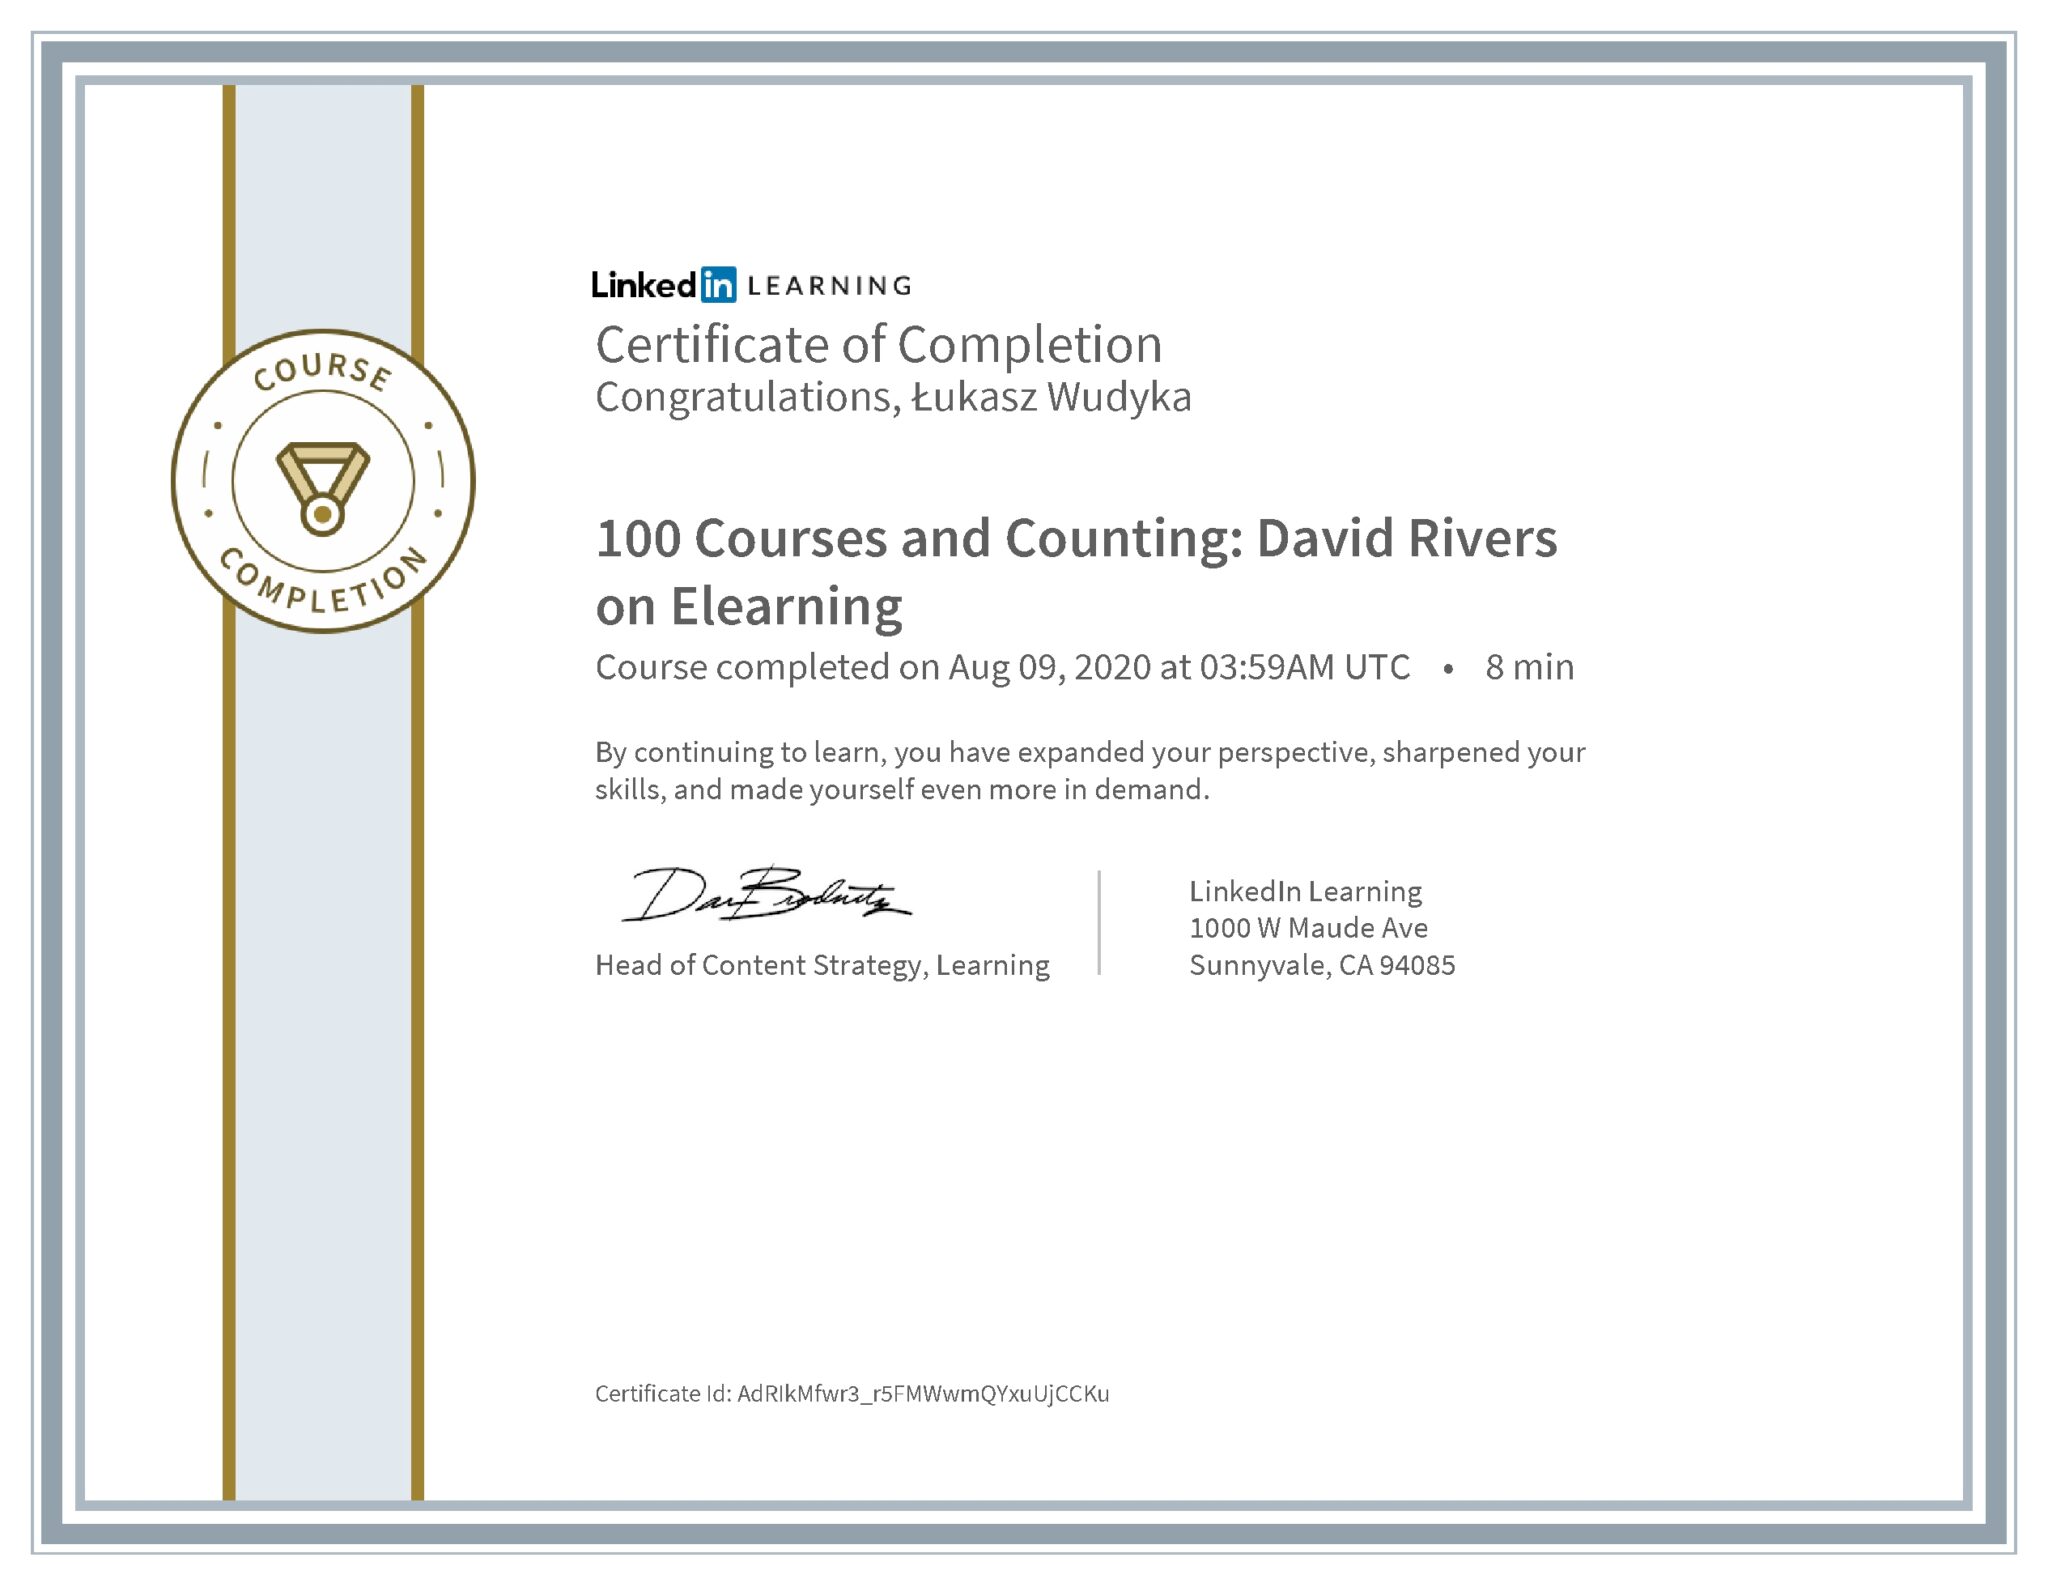 Łukasz Wudyka certyfikat LinkedIn 100 Courses and Counting: David Rivers on Elearning